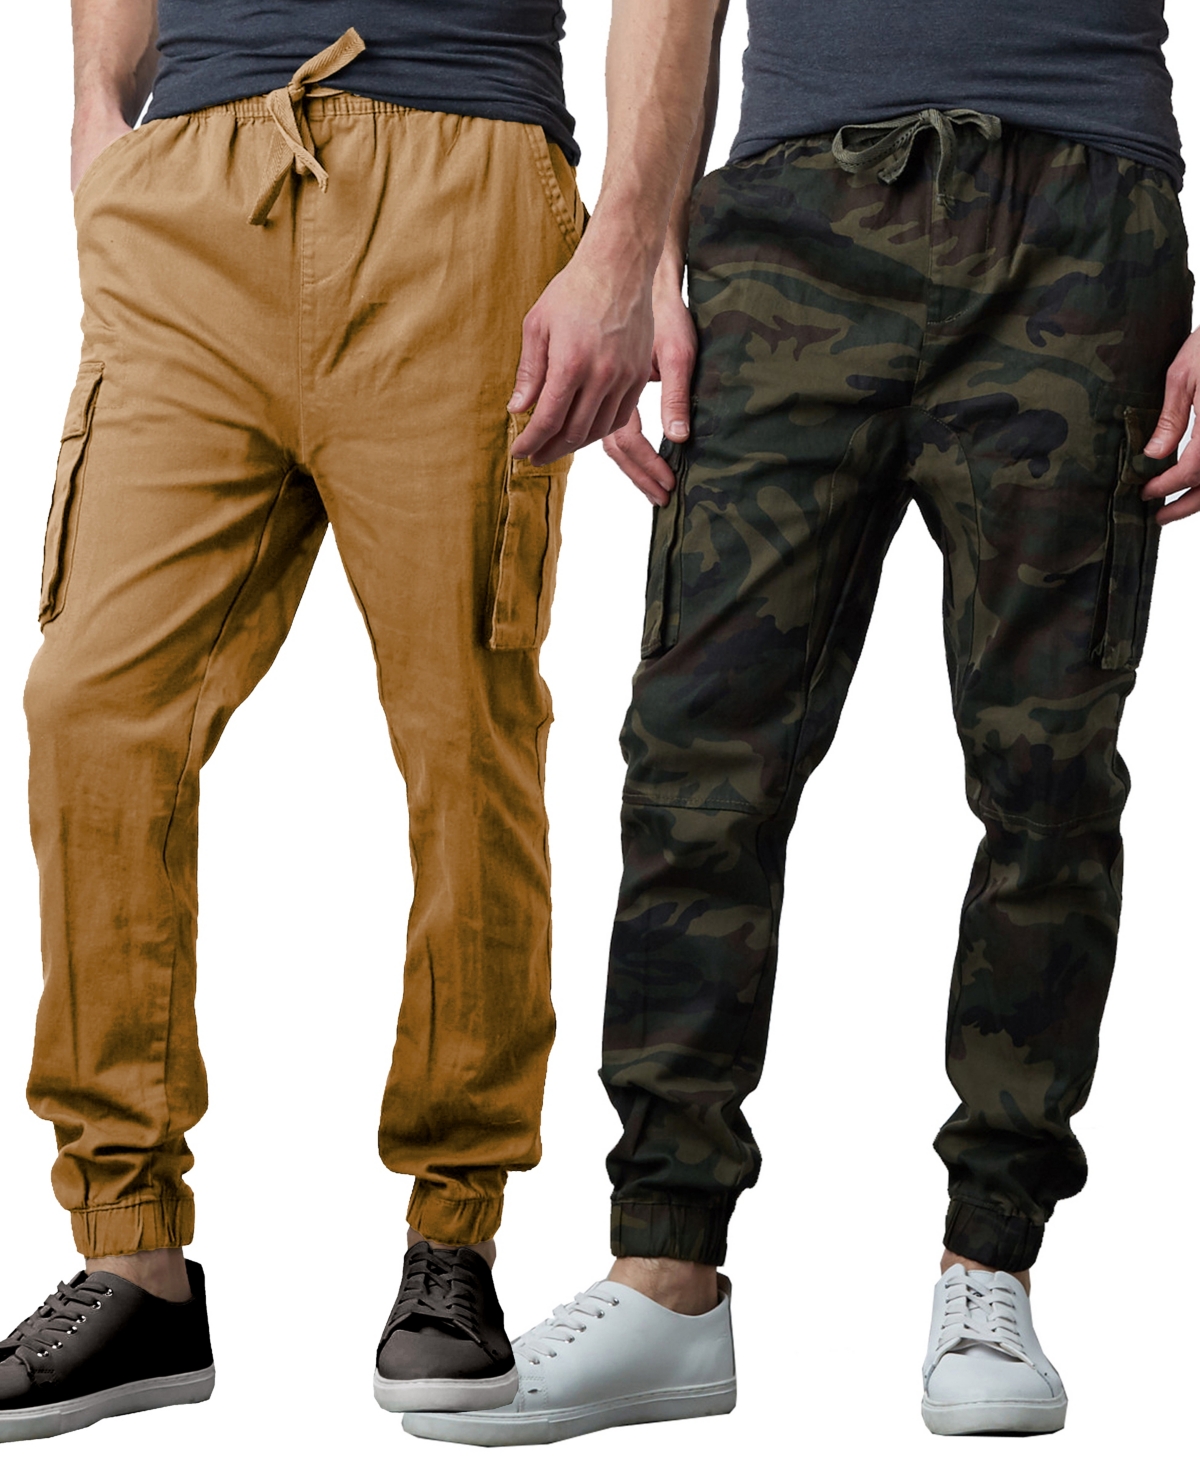 Men's Slim Fit Stretch Cargo Jogger Pants, Pack of 2 - Navy, Woodland